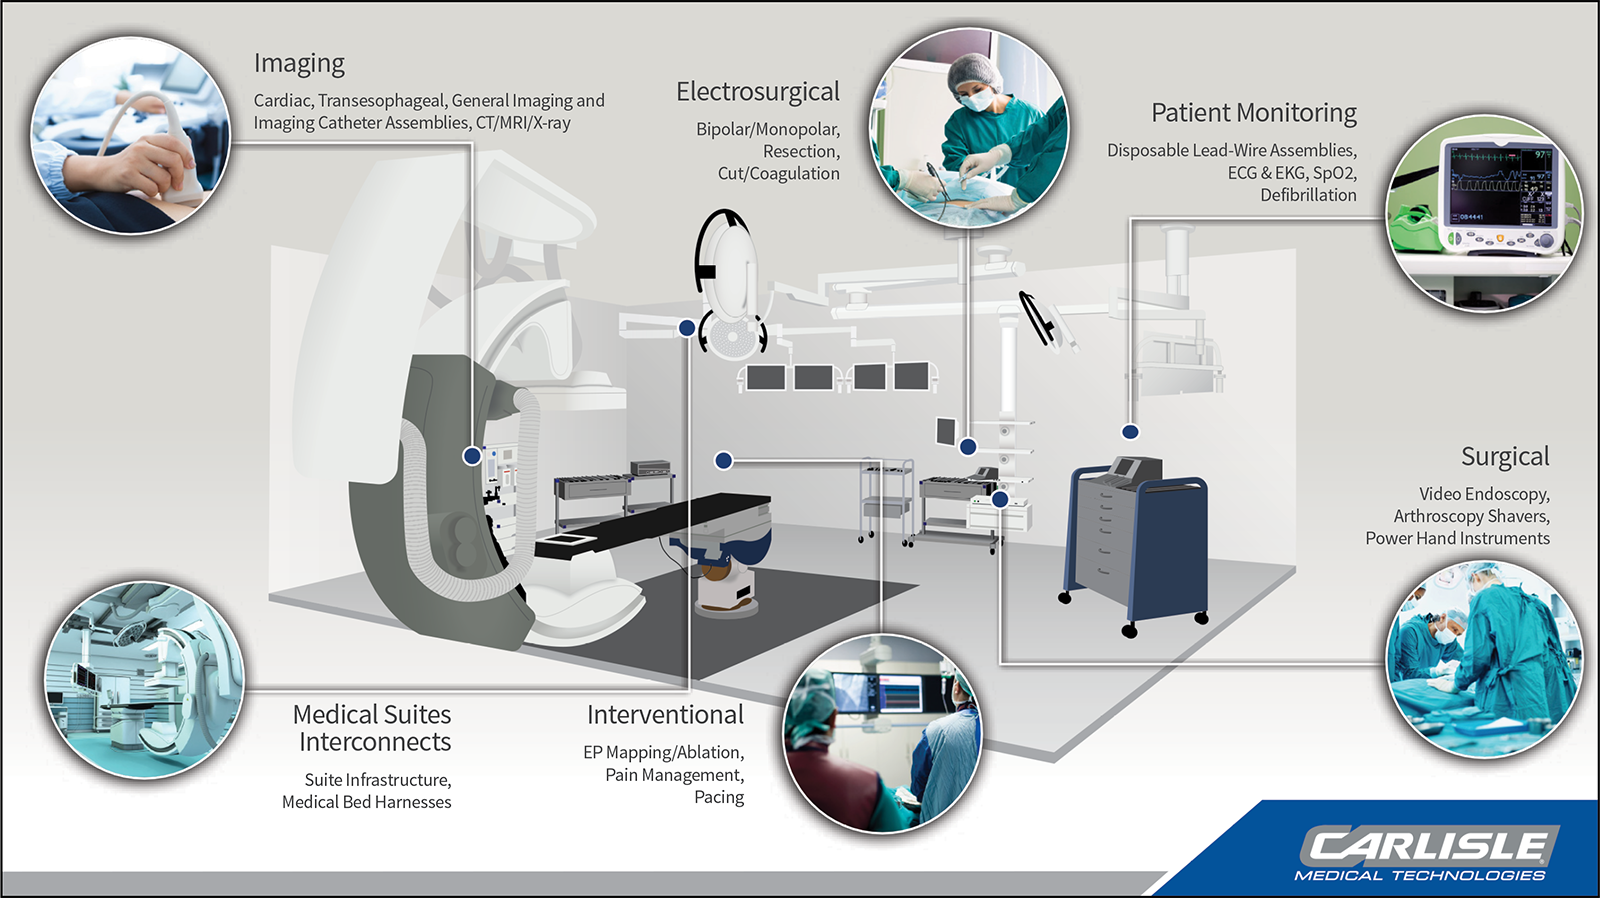 Medical Suites Interconnects